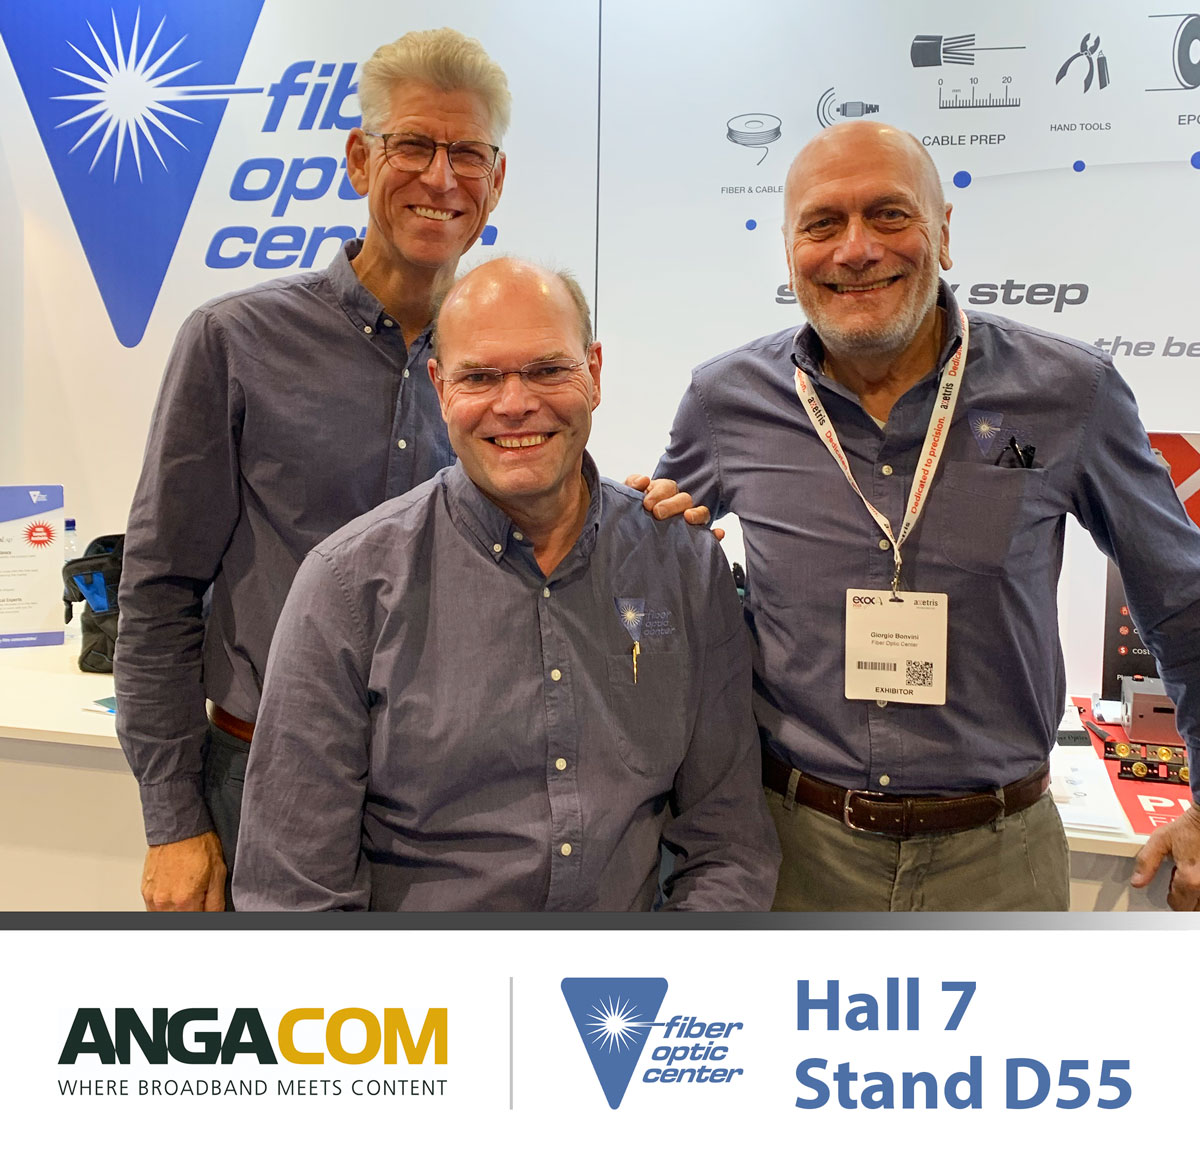 Attendees of #Angacom! Don't forget to sign up for 1-on-1 meetings with our EMEA team to discuss all your #fiberoptic needs during the show at Stand D55 in Hall 7.  

Sign up here: bit.ly/3xbvOev